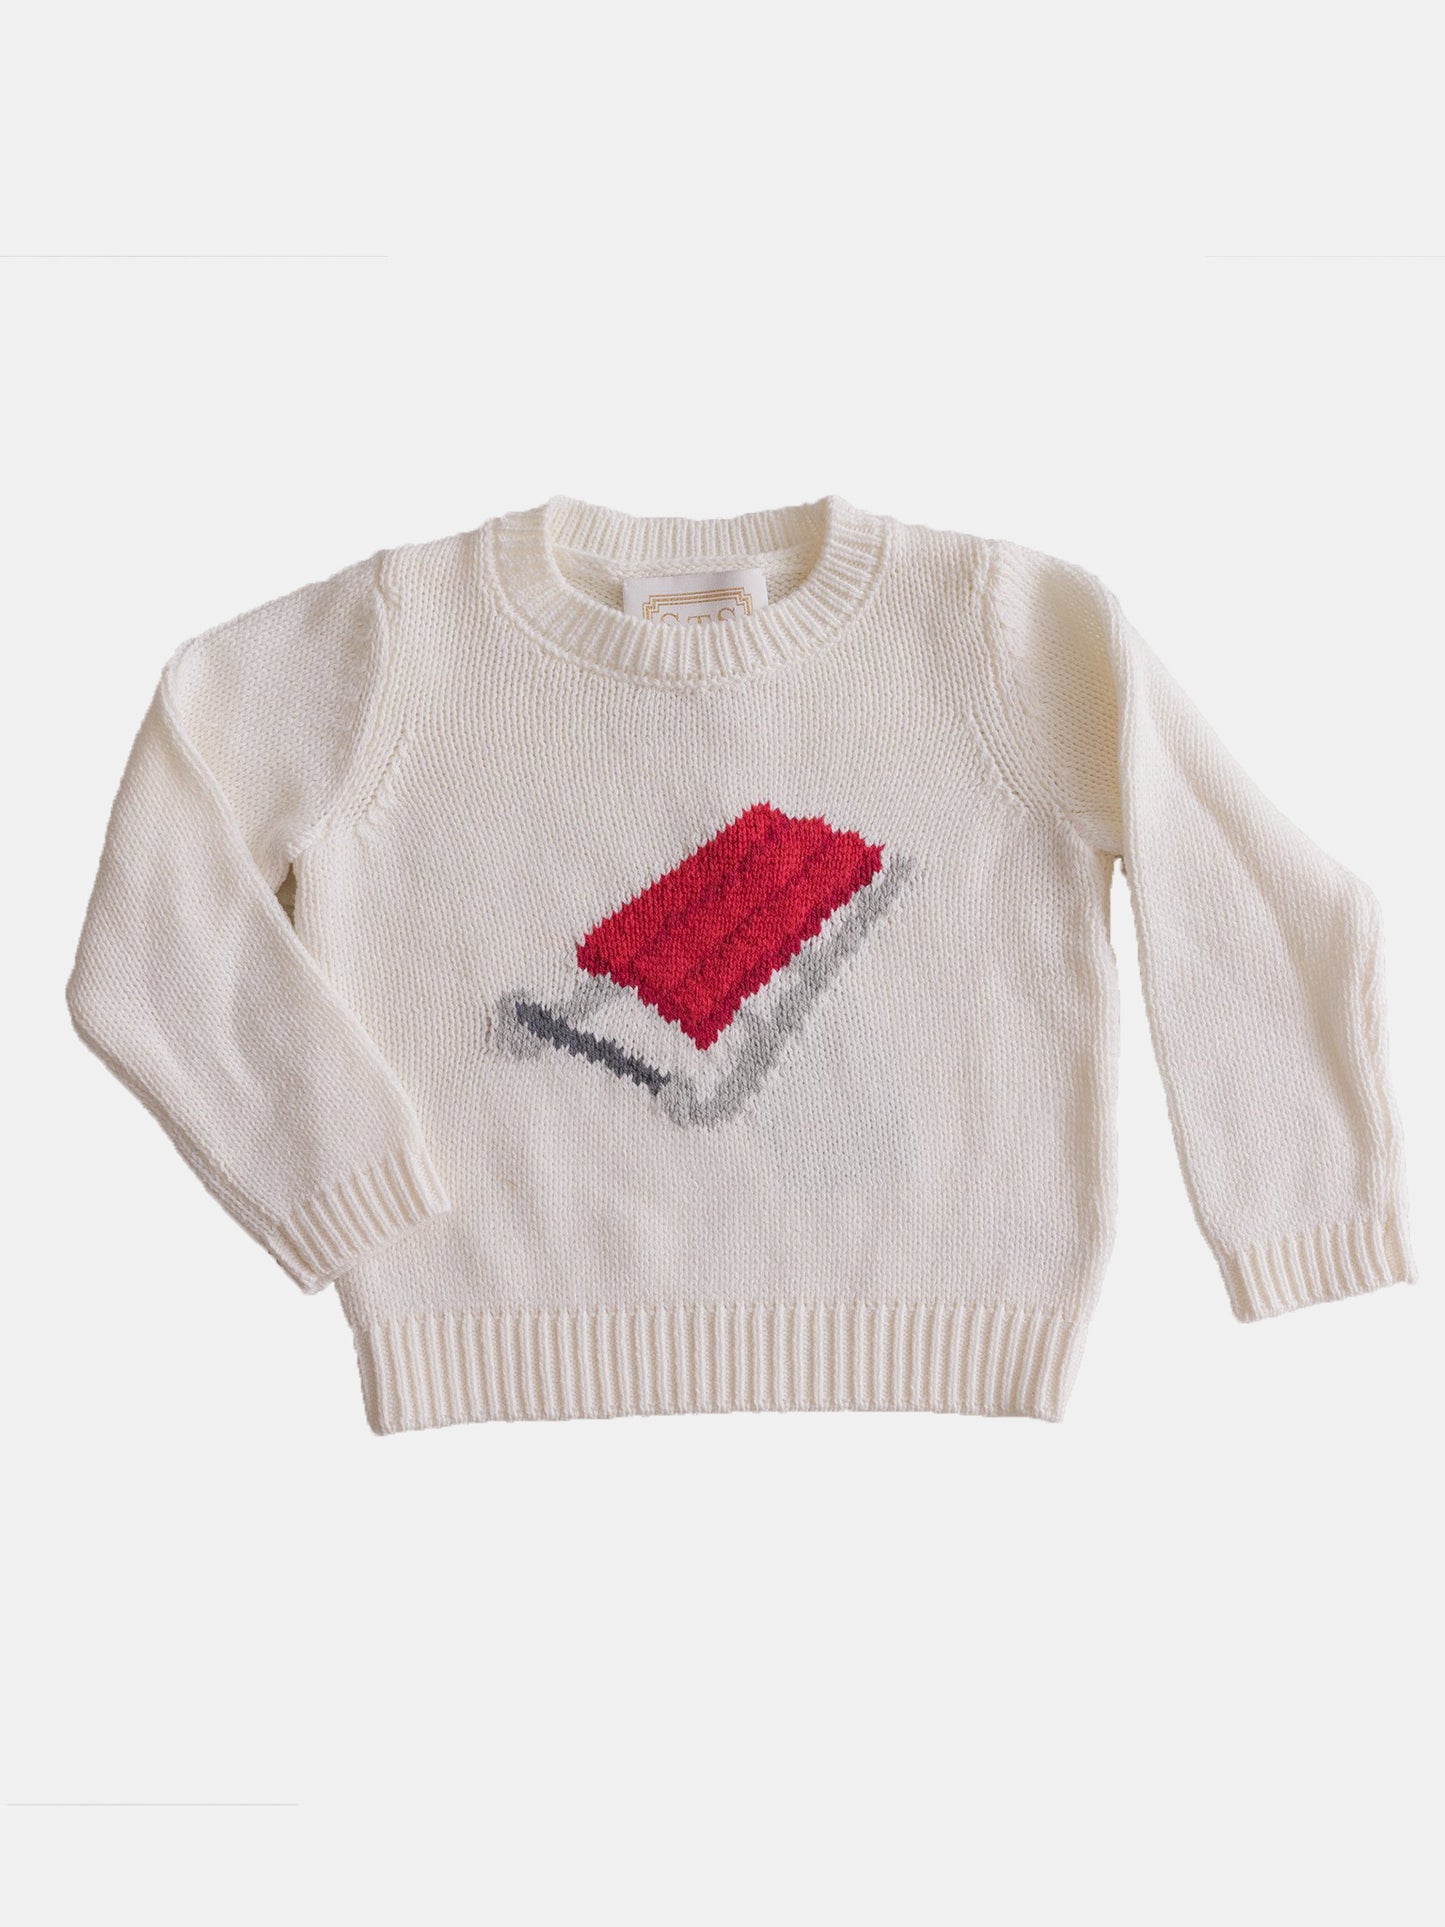 Sail to Sable Boys' Wooden Sled Sweater